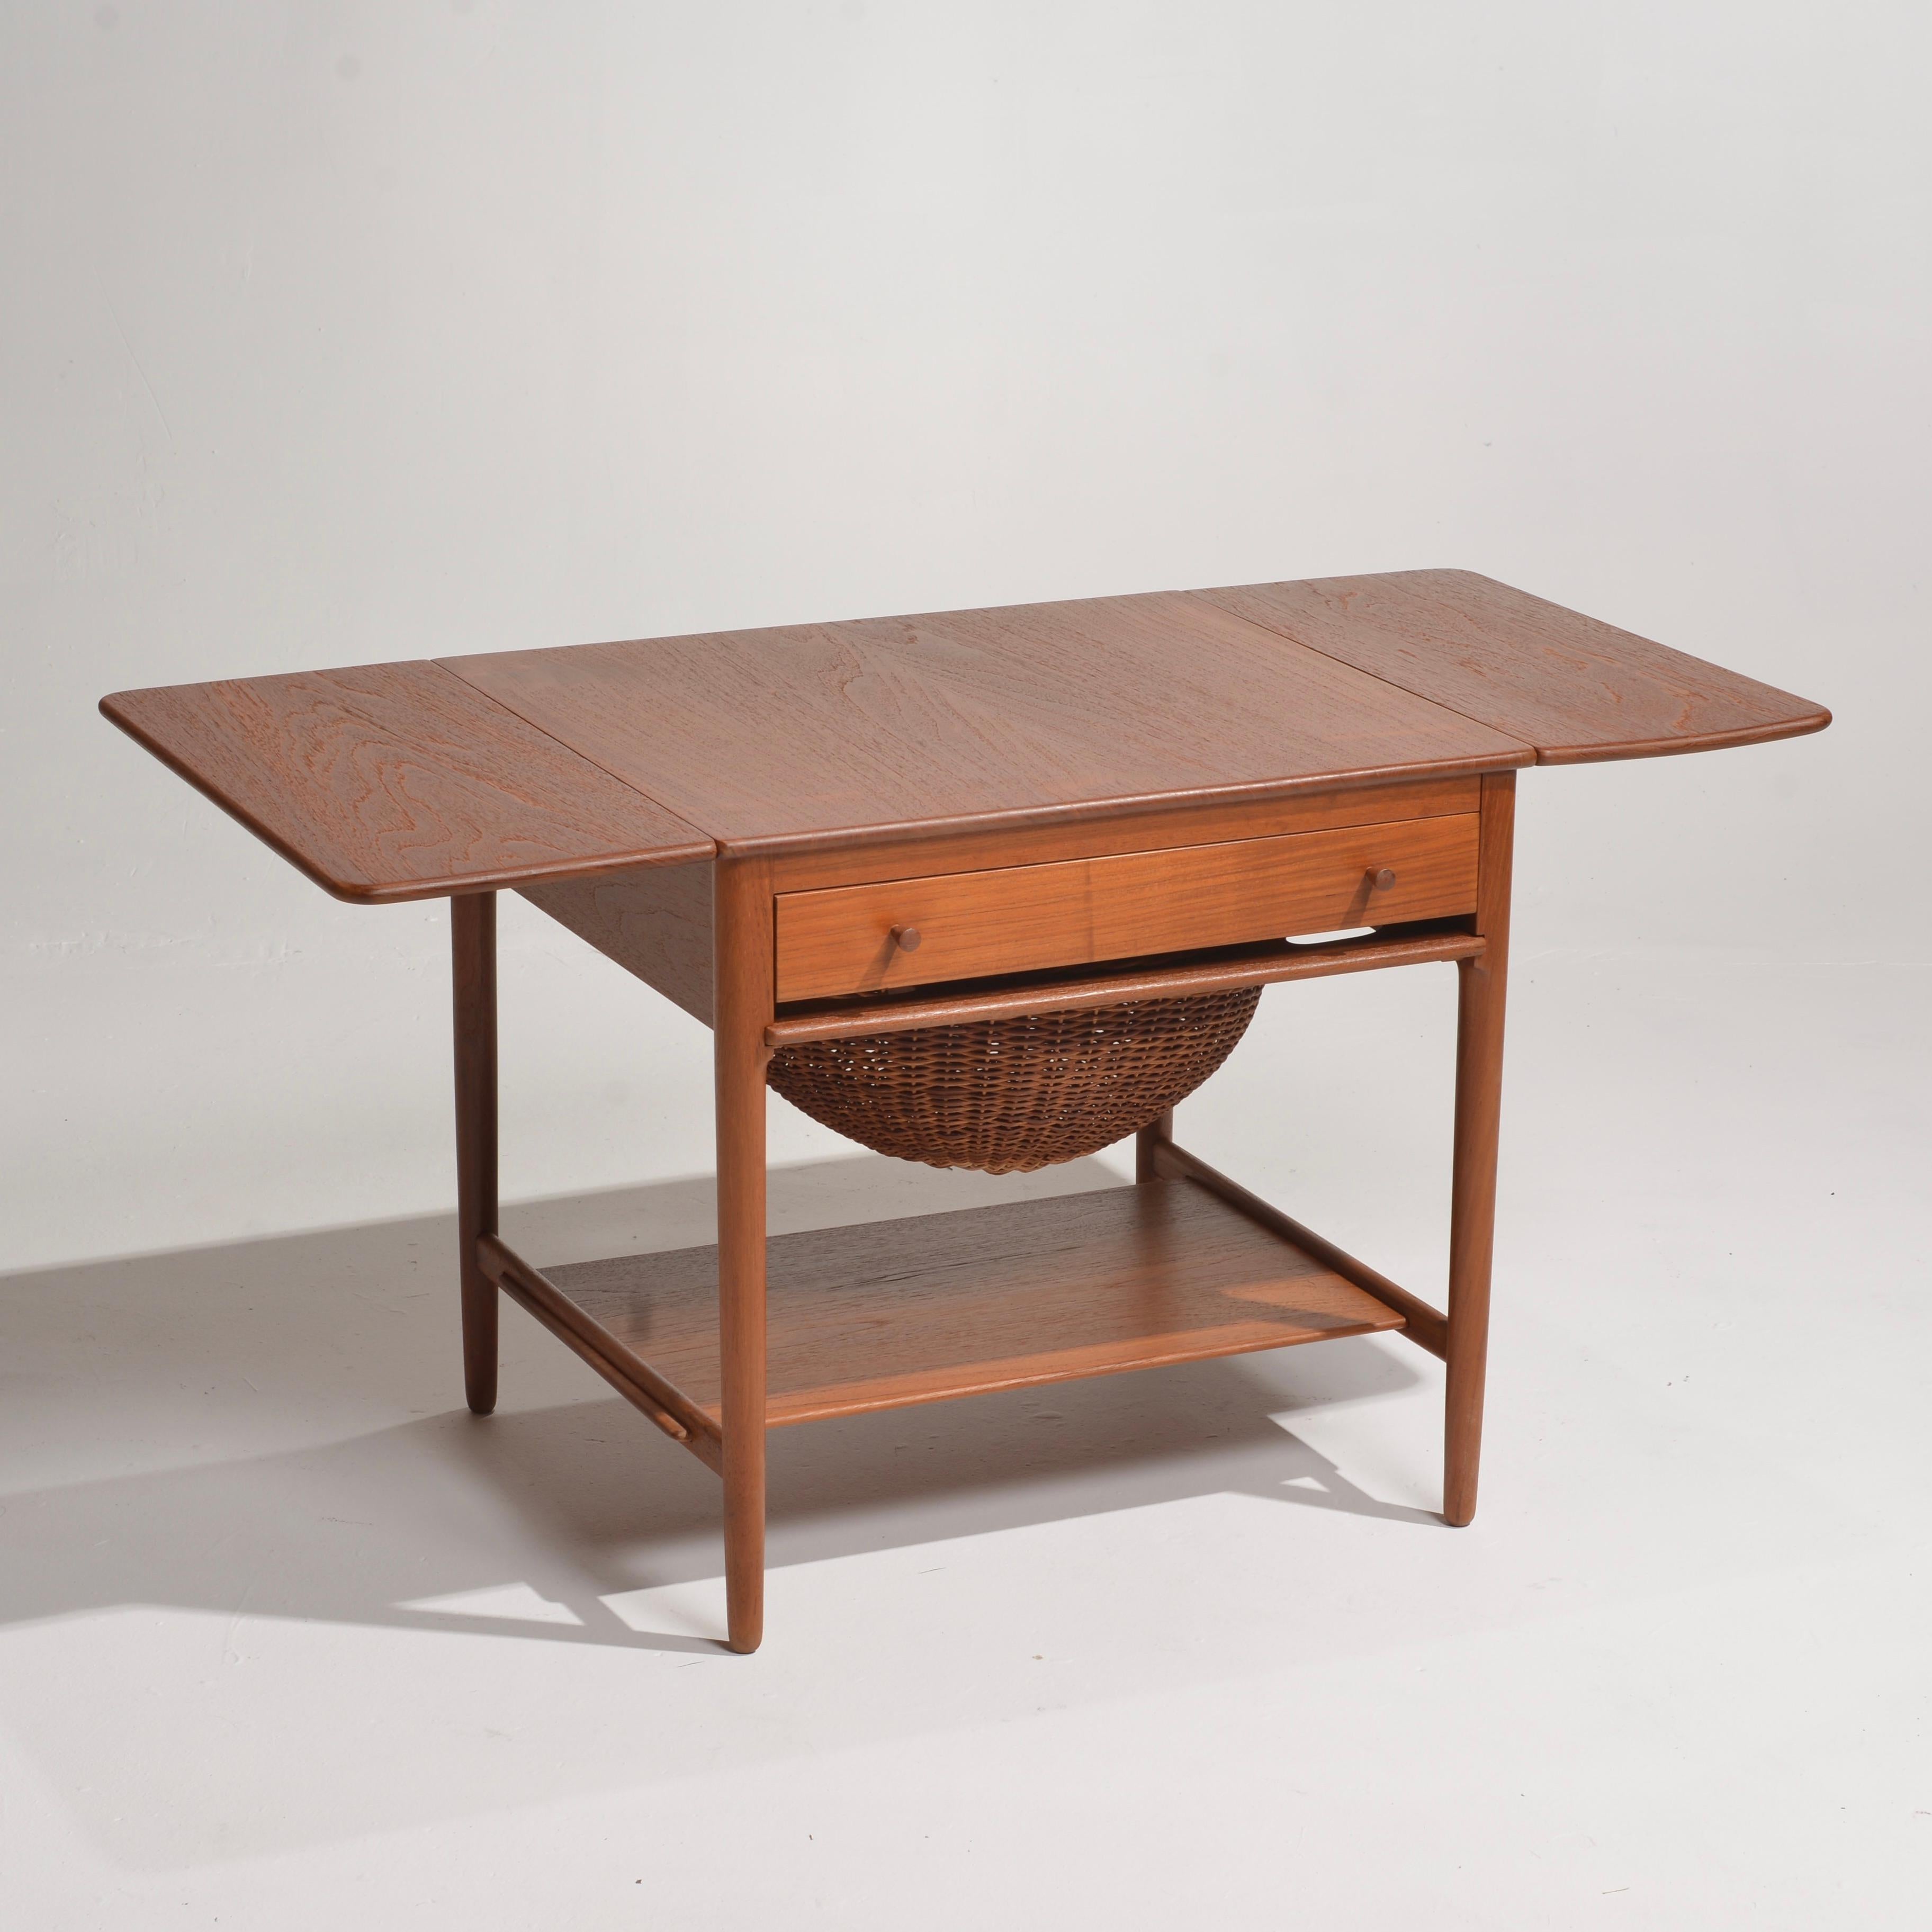 Beautifully crafted model AT-33 sewing table designed by Hans Wegner and manufactured in Denmark by cabinet maker Andreas Tuck. This teak and oak table features two extendable side leaves, a drawer with compartments for sewing notions, a pull out